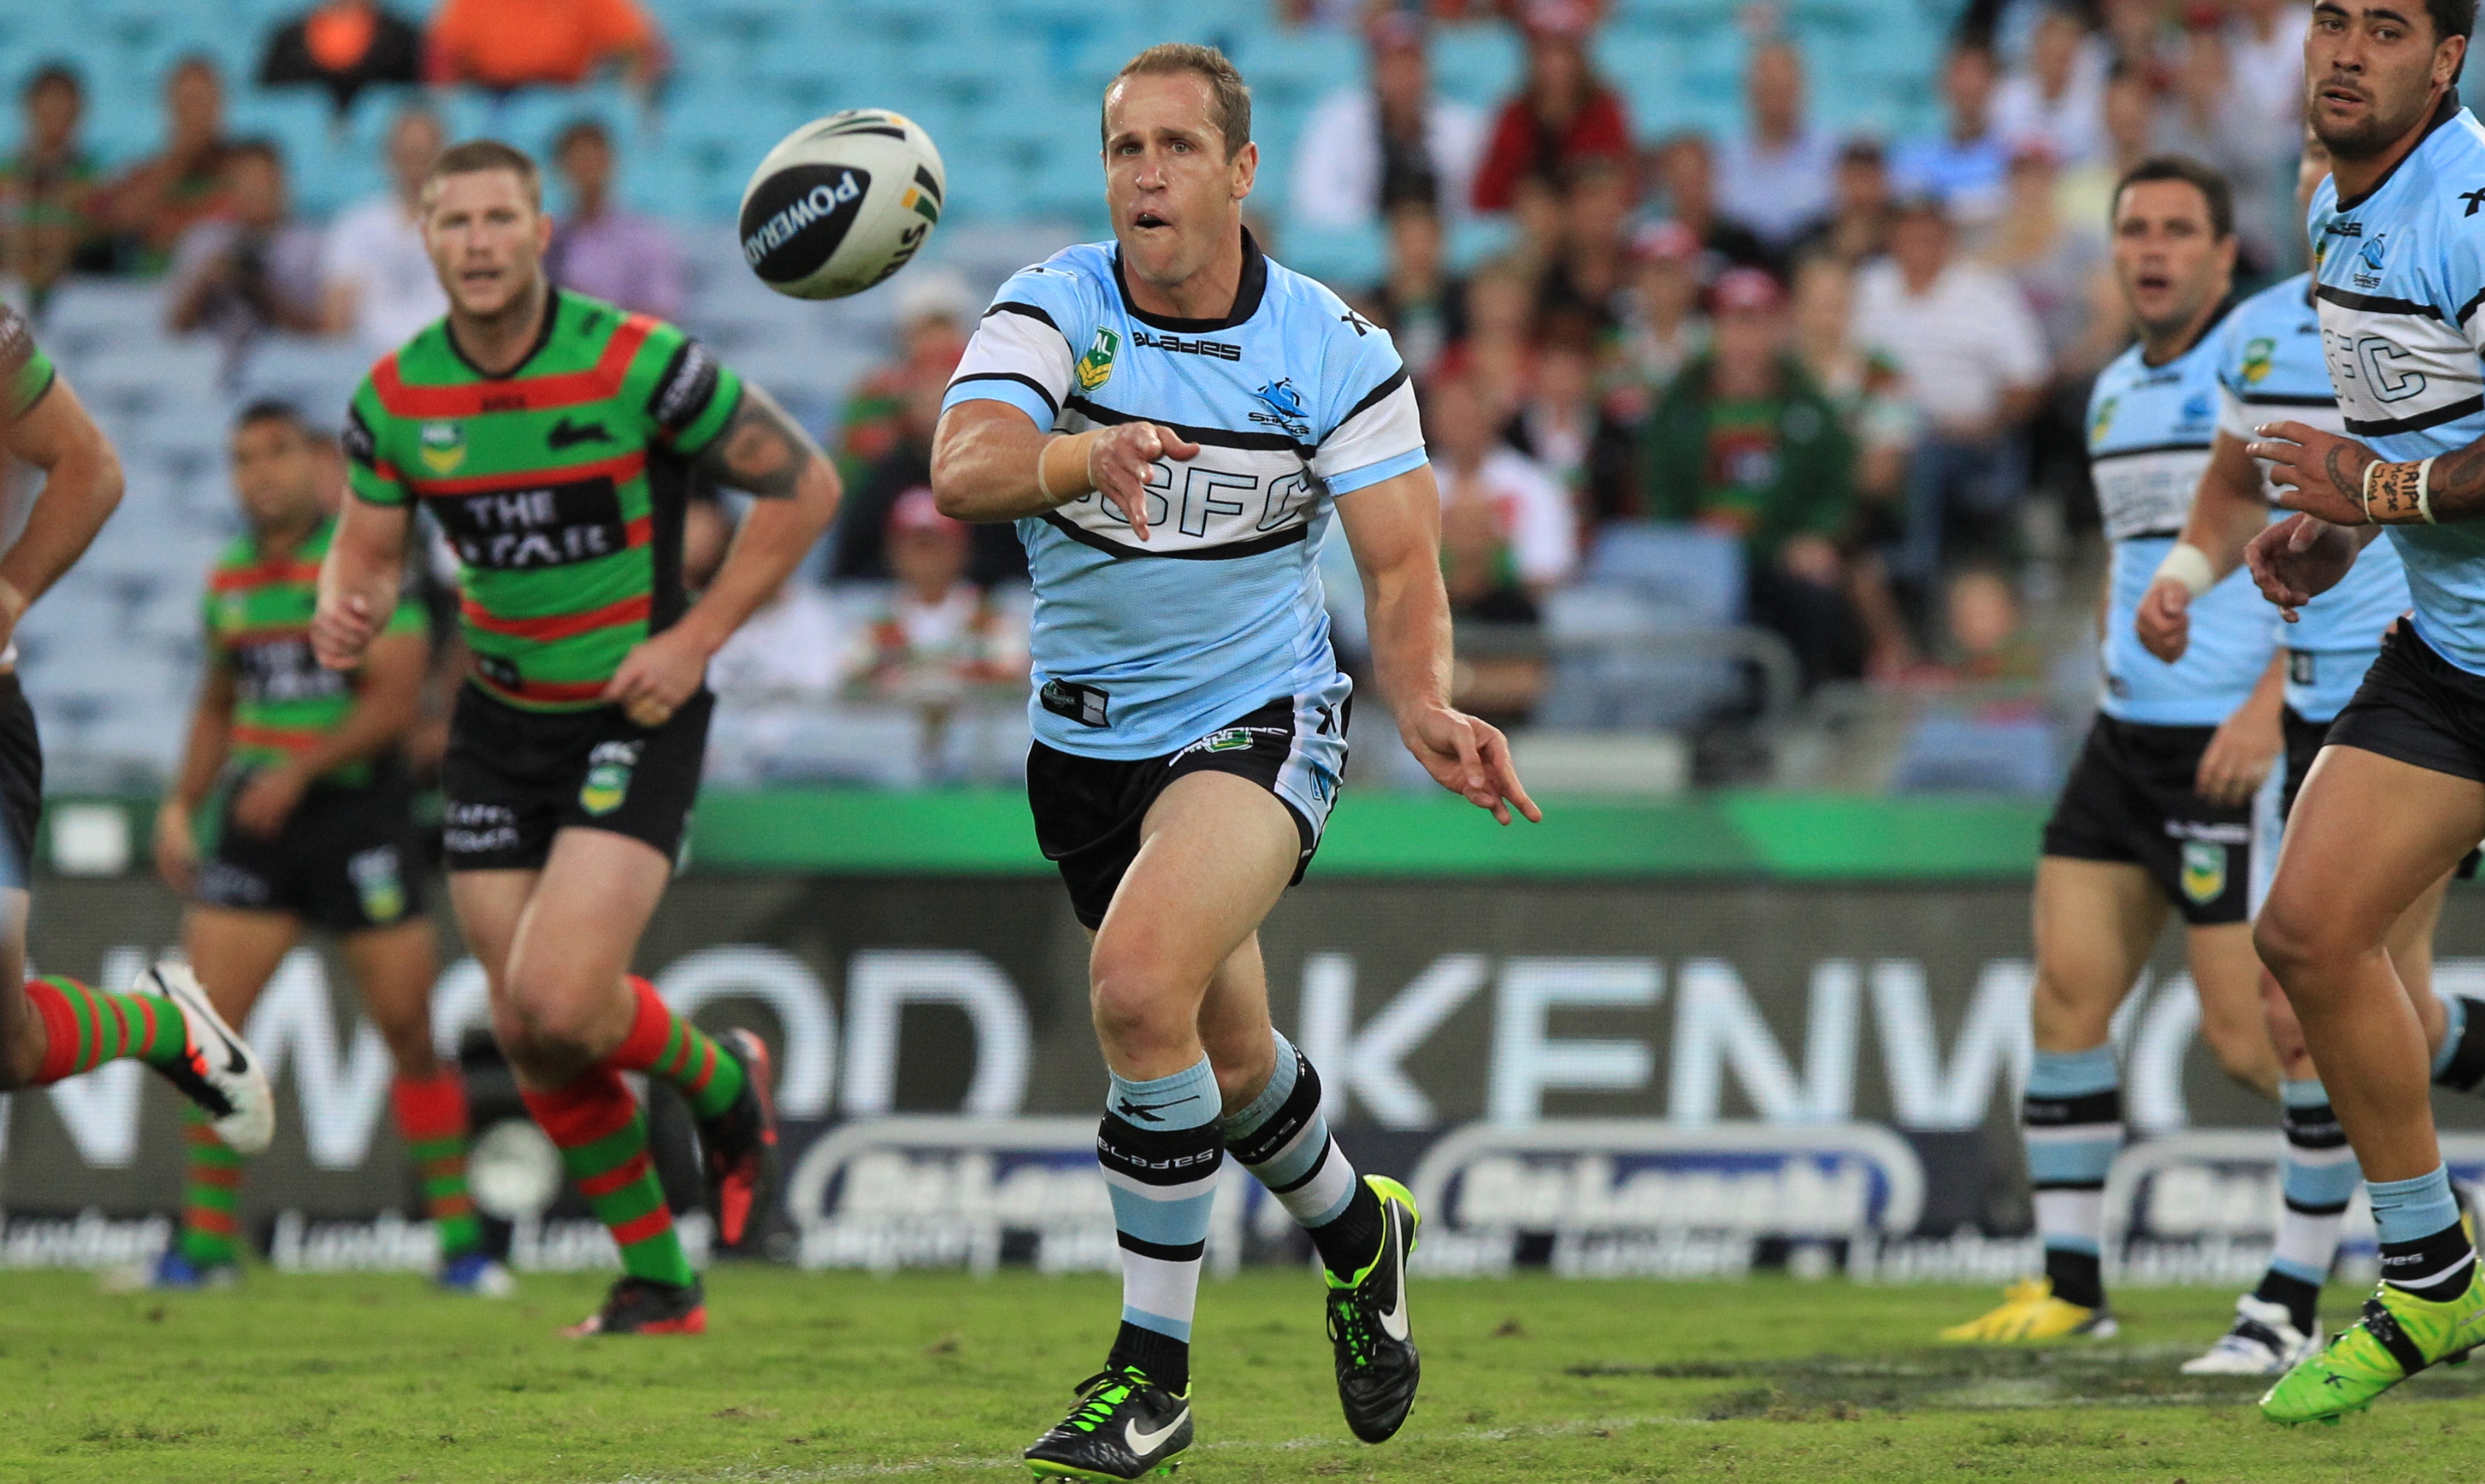 Sharks now face Rabbitohs at Allianz, St George & Sutherland Shire Leader